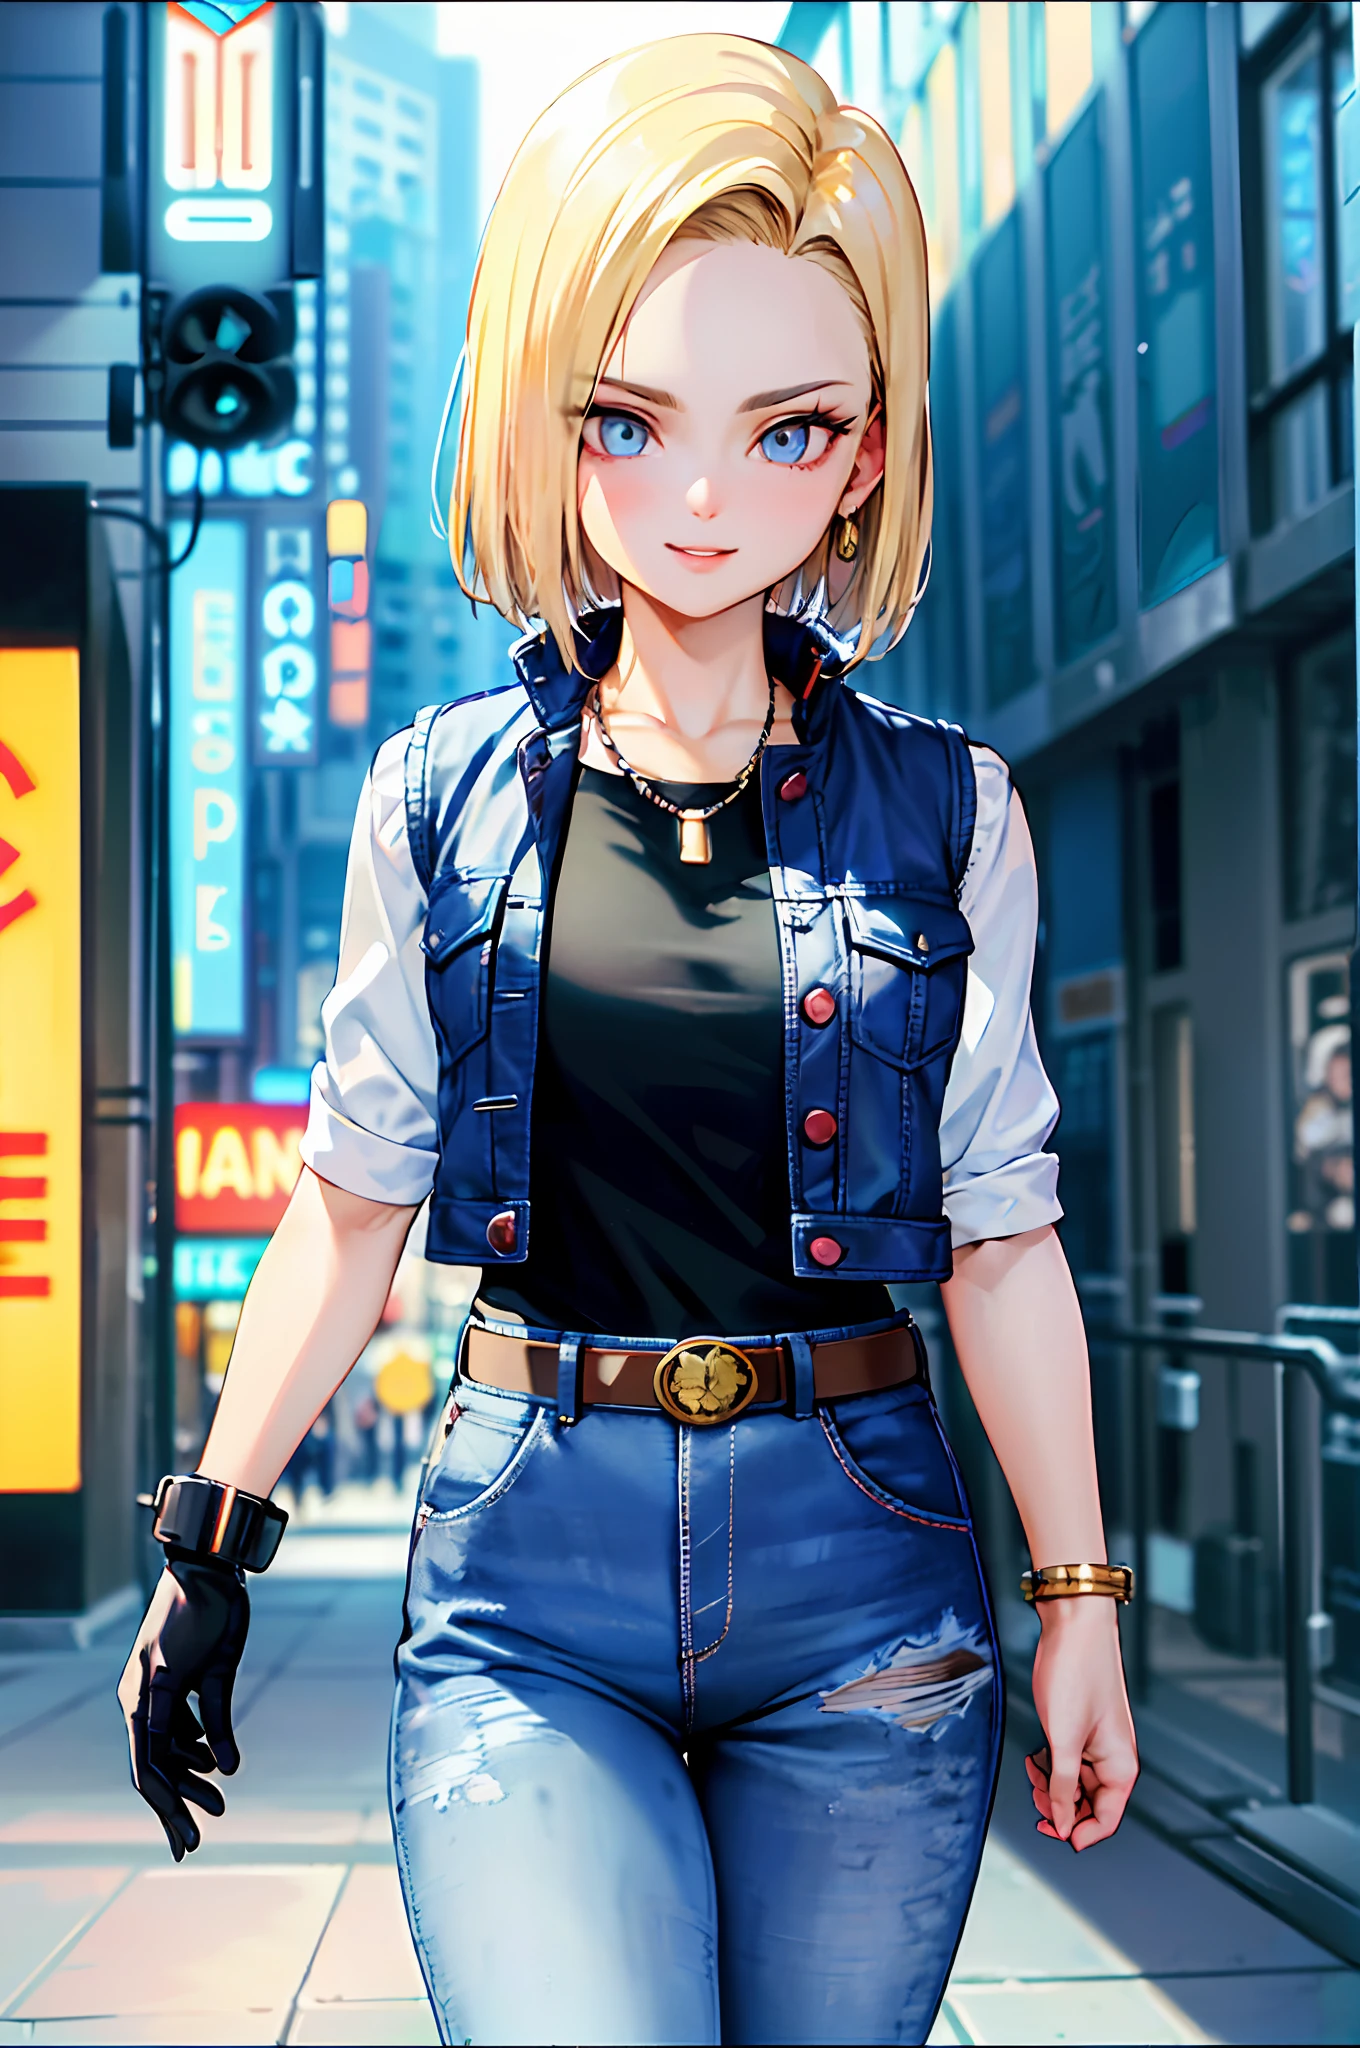 tmasterpiece， Best quality at best， ultra - detailed， absurderes， Sexy portrait of Android18DB， solo， 耳Nipple Ring， jewely， denim pant， ssmile， thongs， croptop tanktop， abs,trouser， mitts， choker necklace， denim pant， Cyberpunk Street bustling neon lights， Volumetriclighting， best qualtiy， tmasterpiece， Complicated details， Tone-mapping， tack sharp focus， ultra - detailed， Trend at Artstation，